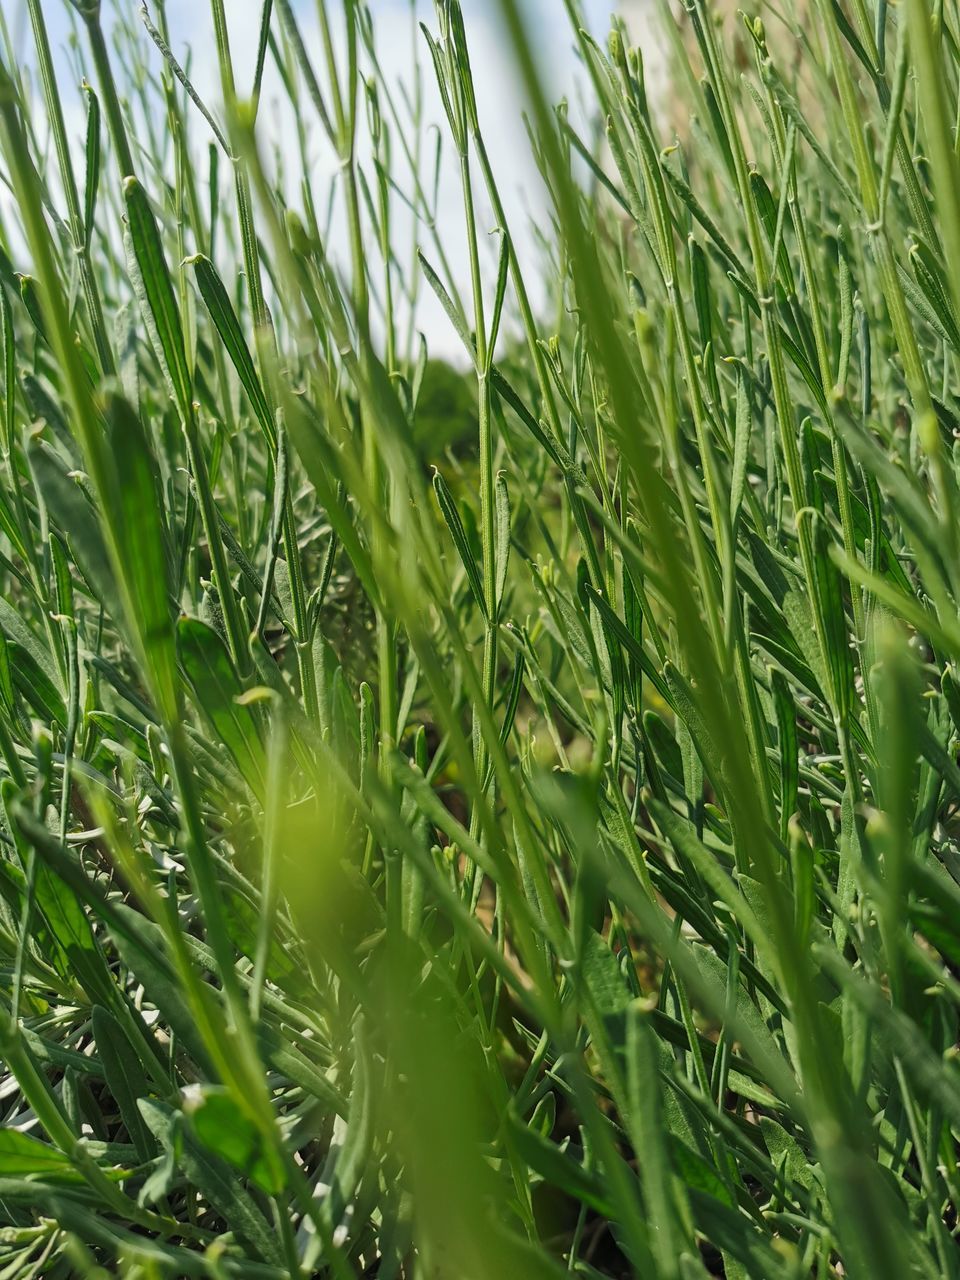 plant, growth, green, grass, field, nature, land, agriculture, lawn, beauty in nature, crop, no people, day, rural scene, cereal plant, landscape, close-up, meadow, flower, leaf, farm, tranquility, outdoors, plant part, freshness, wet, drop, blade of grass, paddy field, environment, hierochloe, food, water, food and drink, plant stem